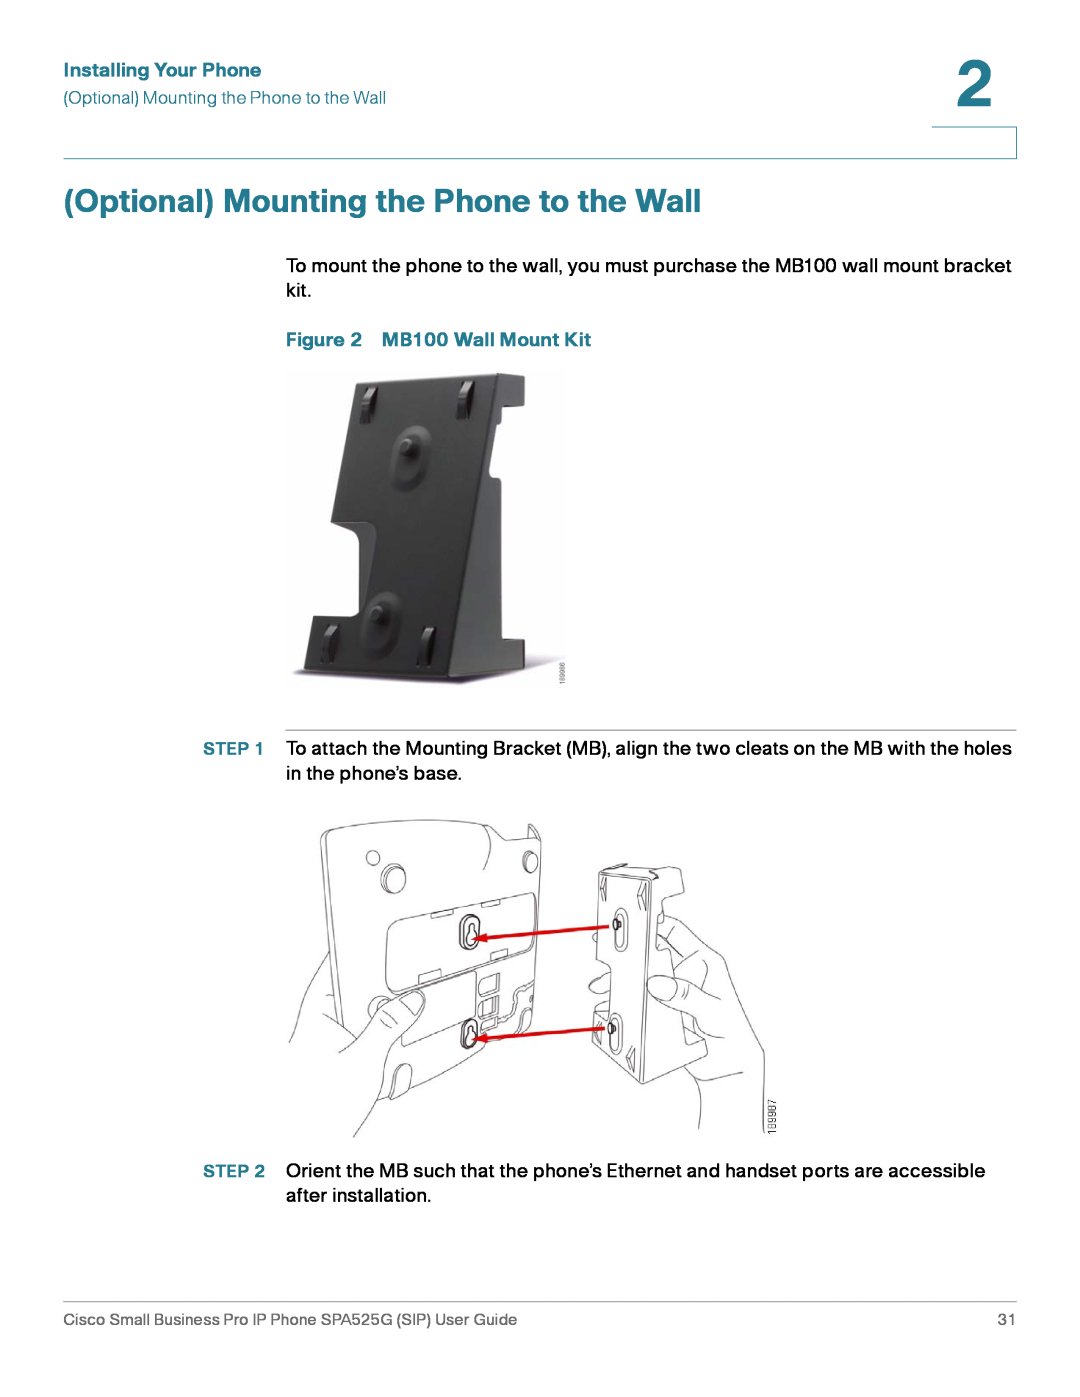 Cisco Systems SPA525G manual Optional Mounting the Phone to the Wall, Installing Your Phone, MB100 Wall Mount Kit 